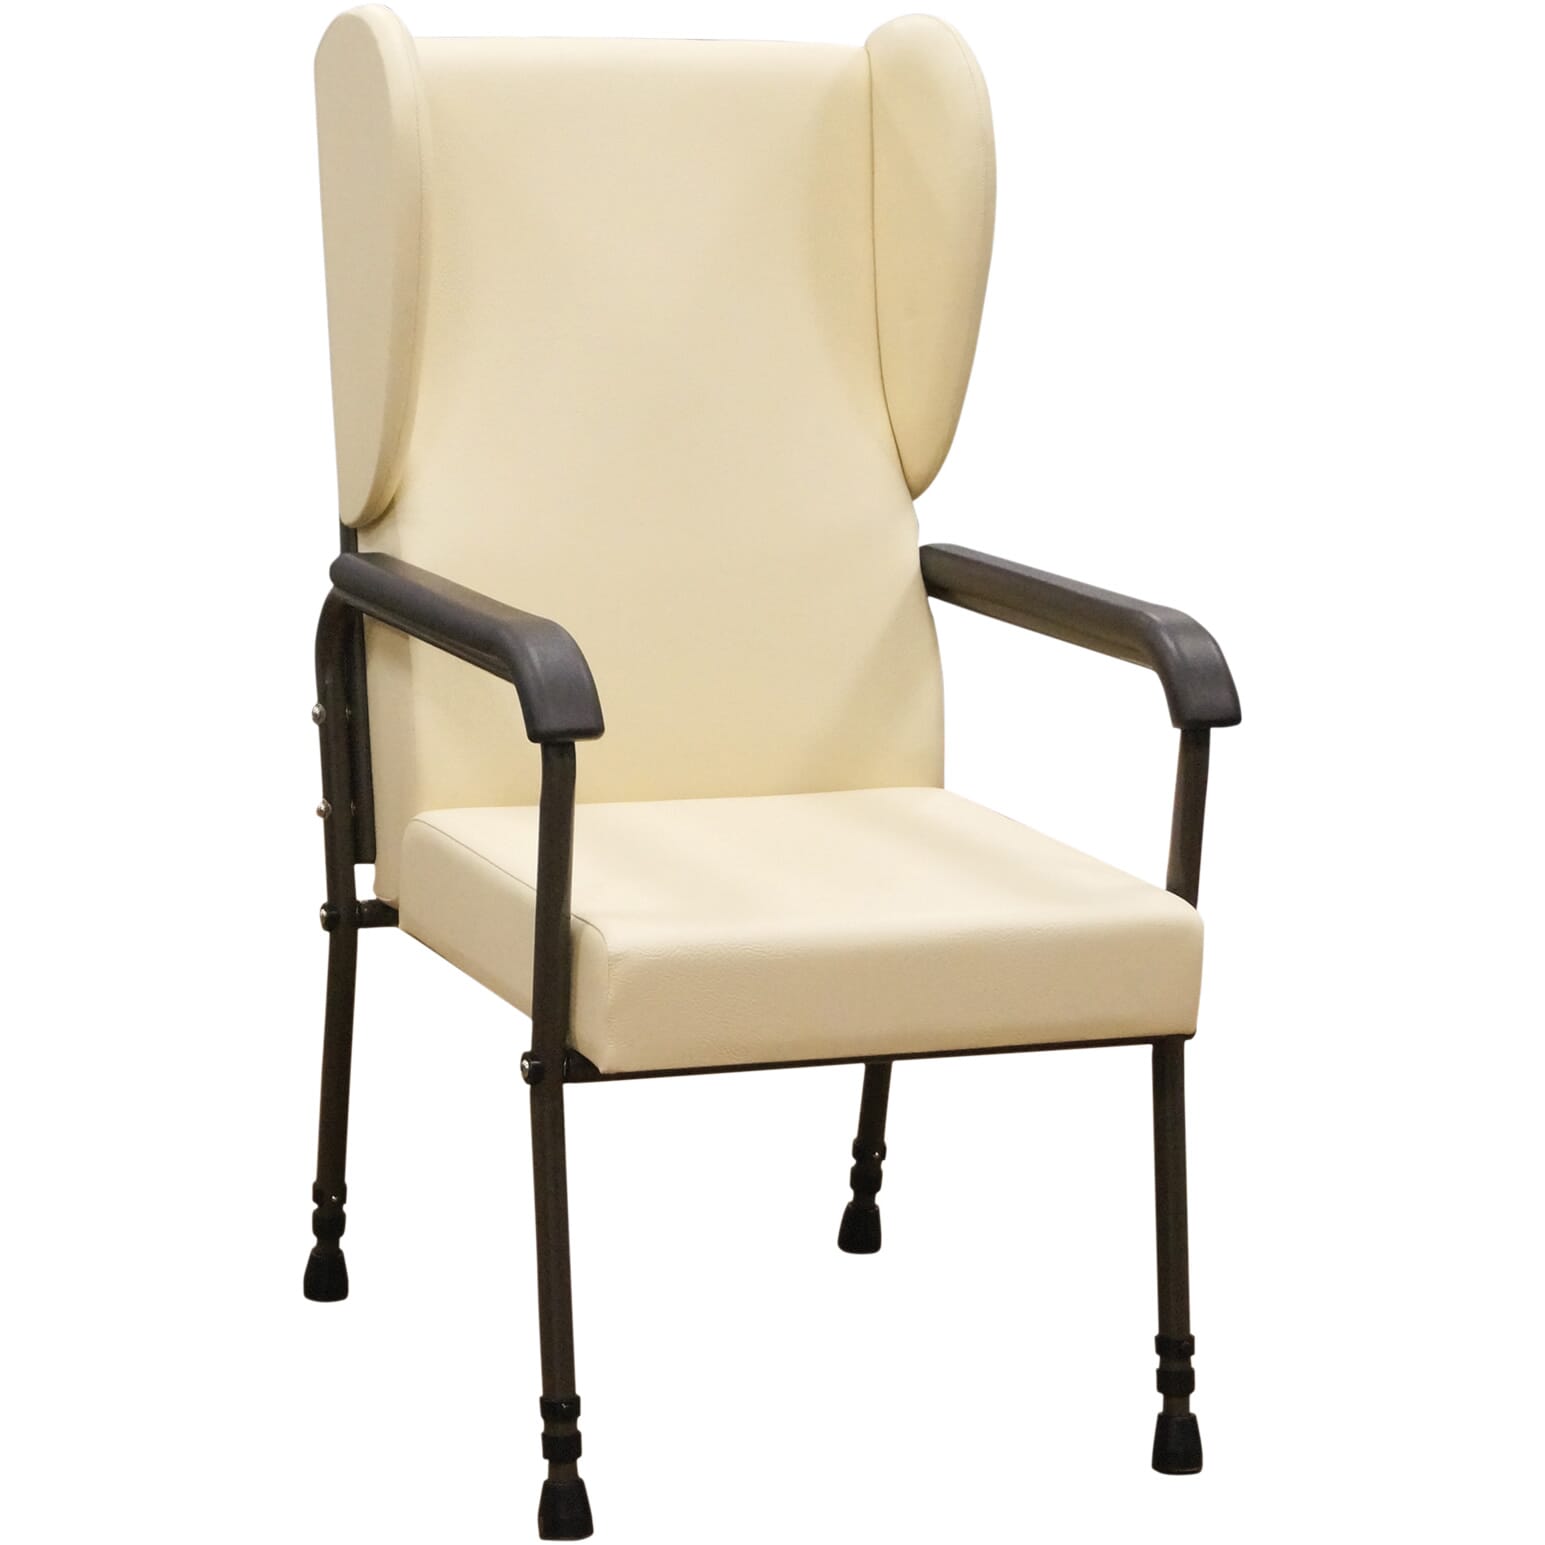 View Chelsfield Height Adjustable Chair Cream information